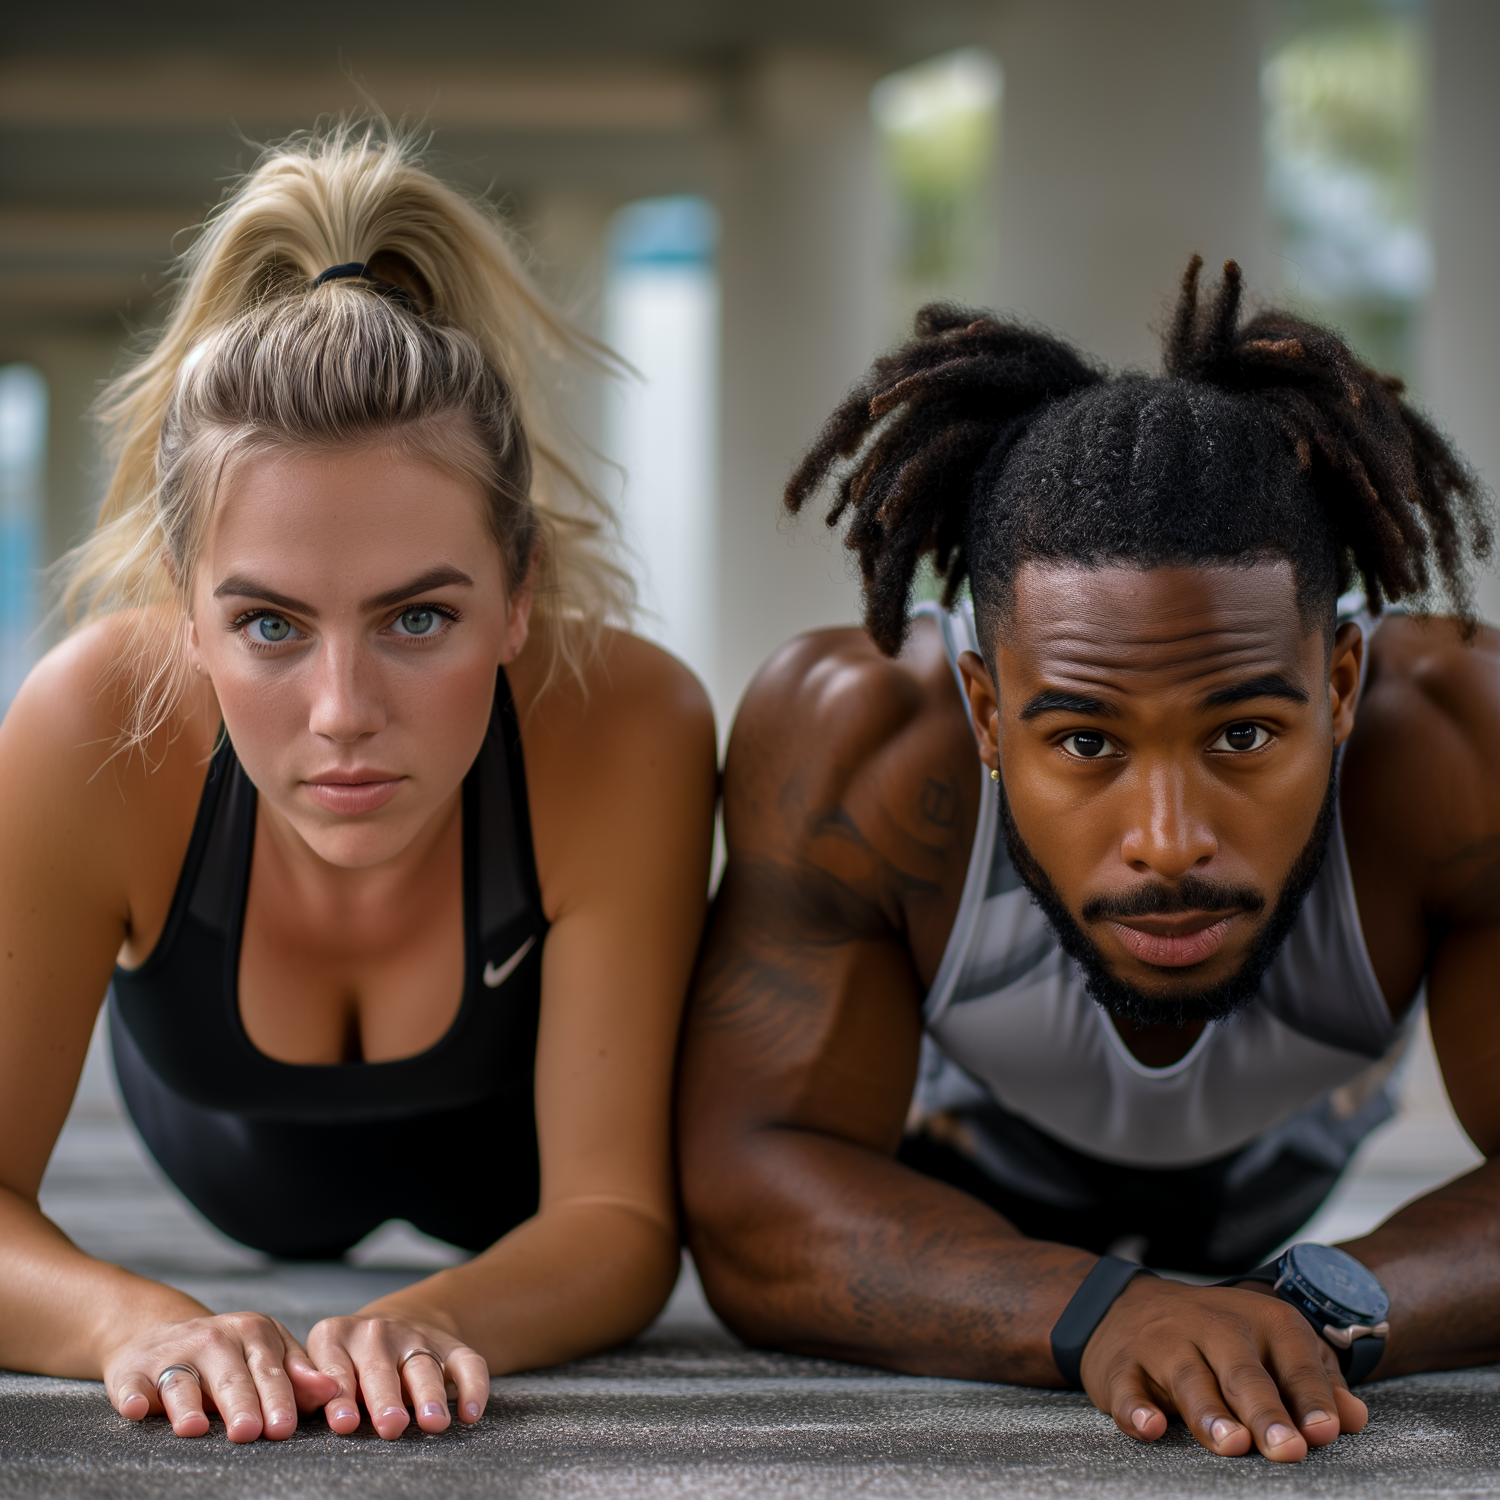 Woman and Man dressed in fitness attire in plank position on floor.